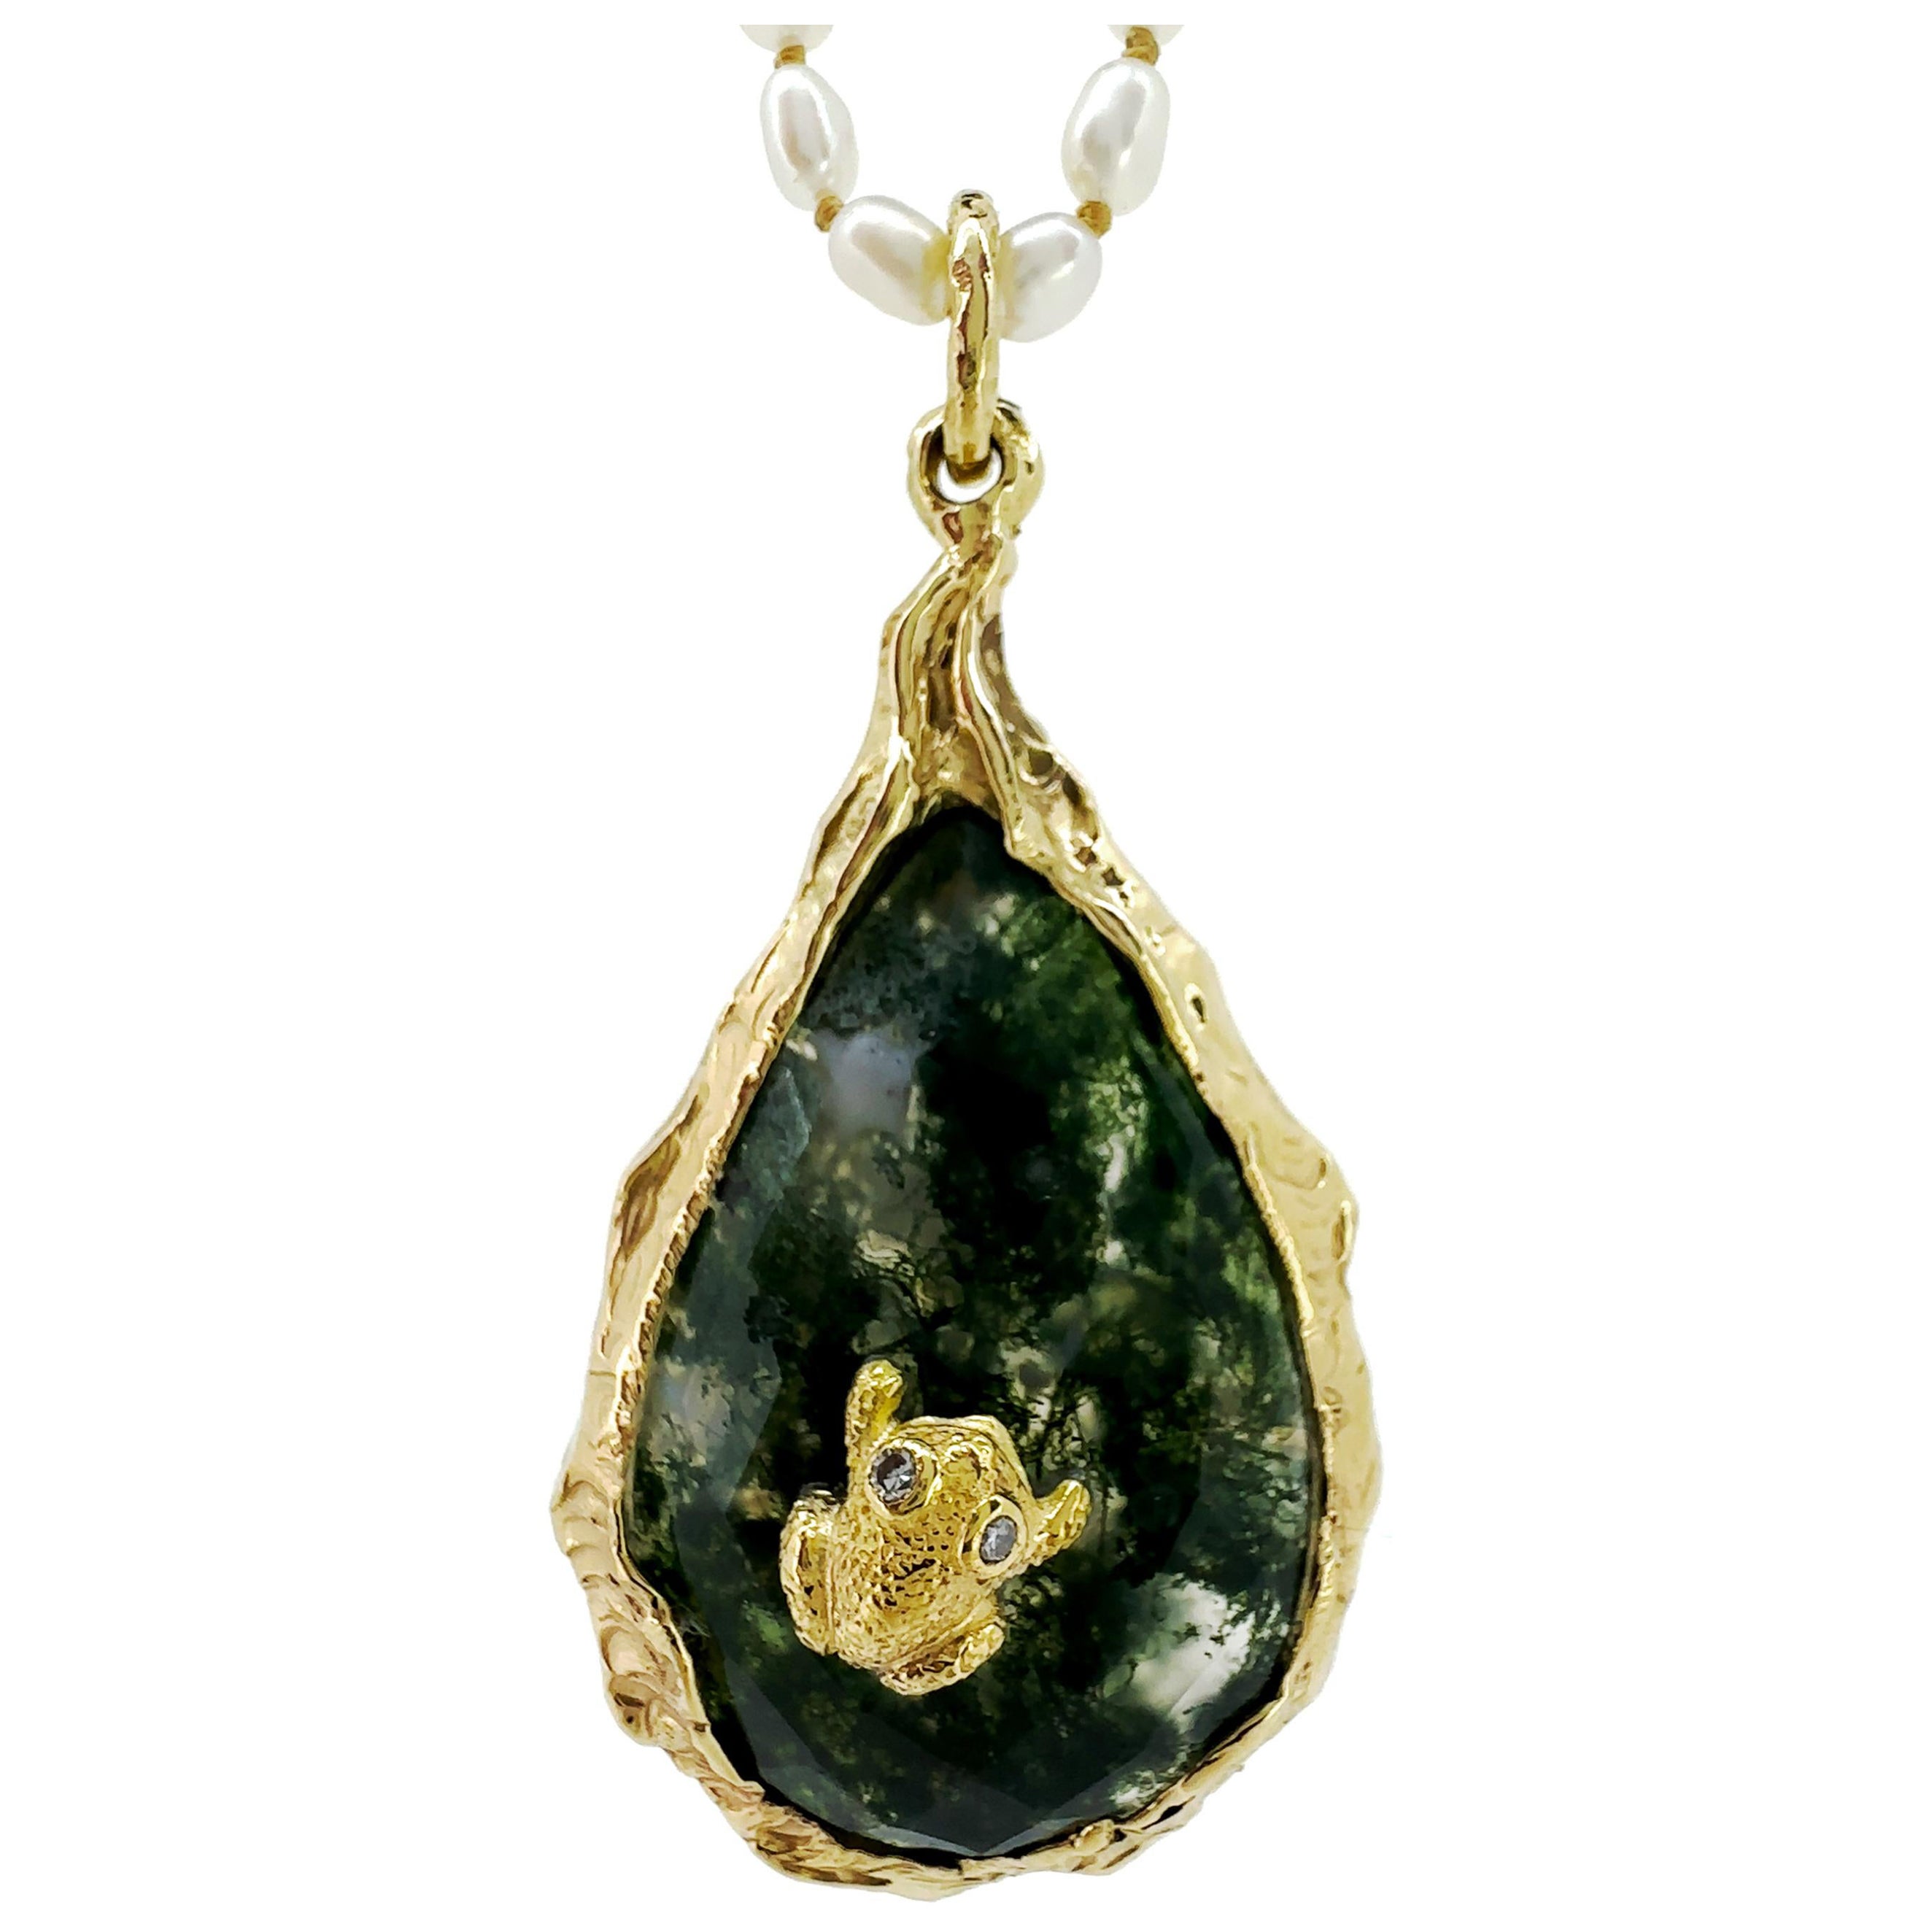 "Mossy" Large Teardrop Pendant in Yellow Gold with Tiny Frog on Moss Agate 